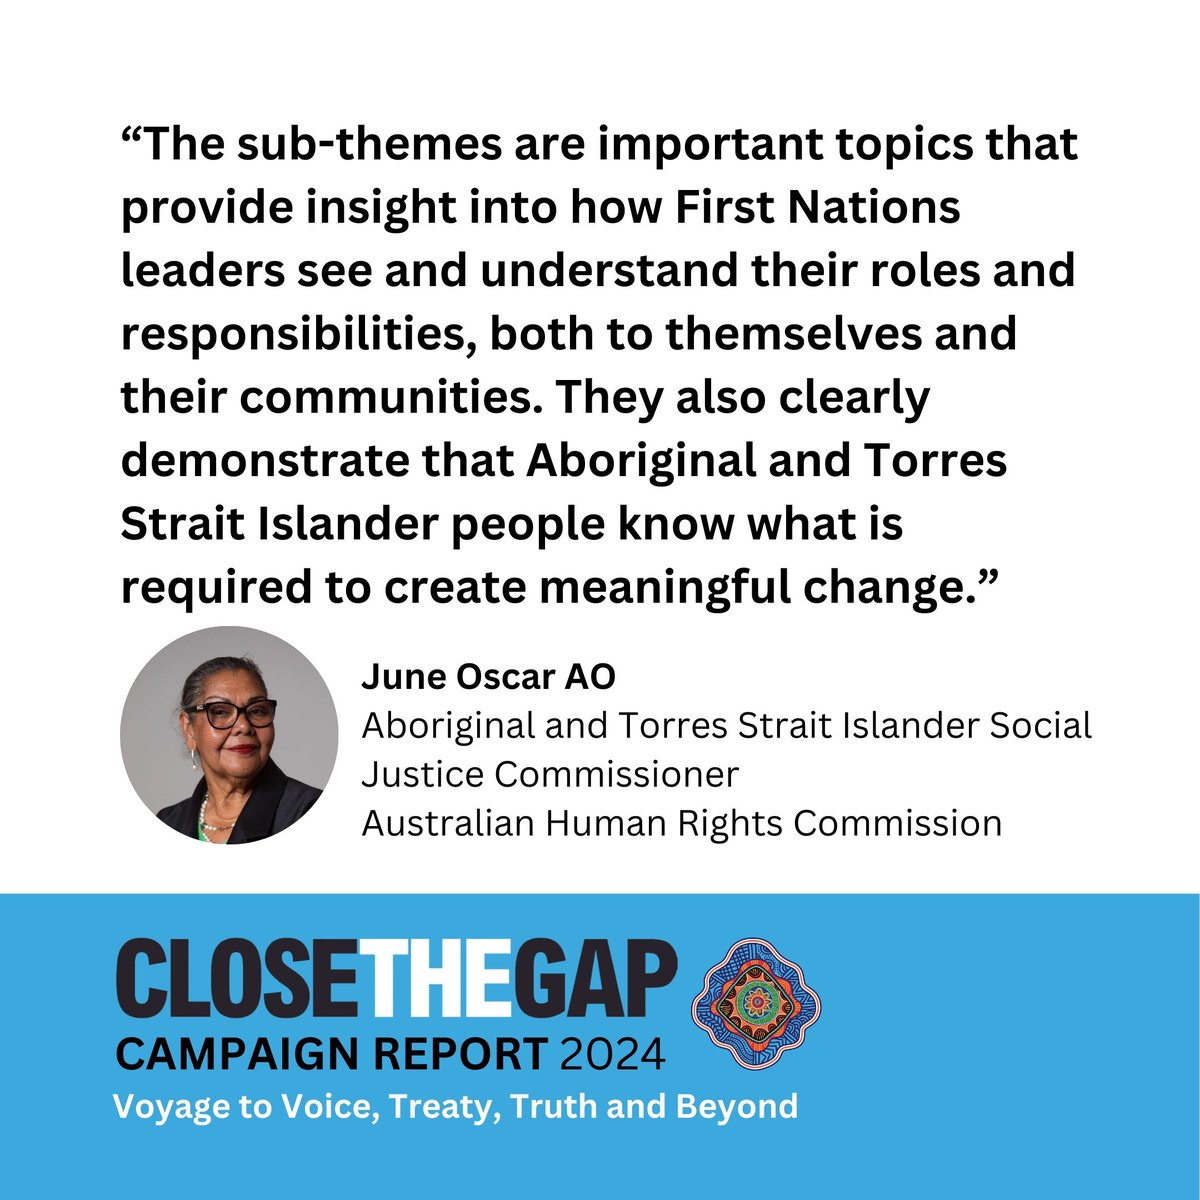 'Voyage to Voice, Treaty, Truth and Beyond' - the 2024 Close the Gap report has been released. The sub-themes include leadership, governance and building our economies. We encourage you to read the report and share it with your networks: closethegap.org.au/ctg-annual-rep… @June_Oscar